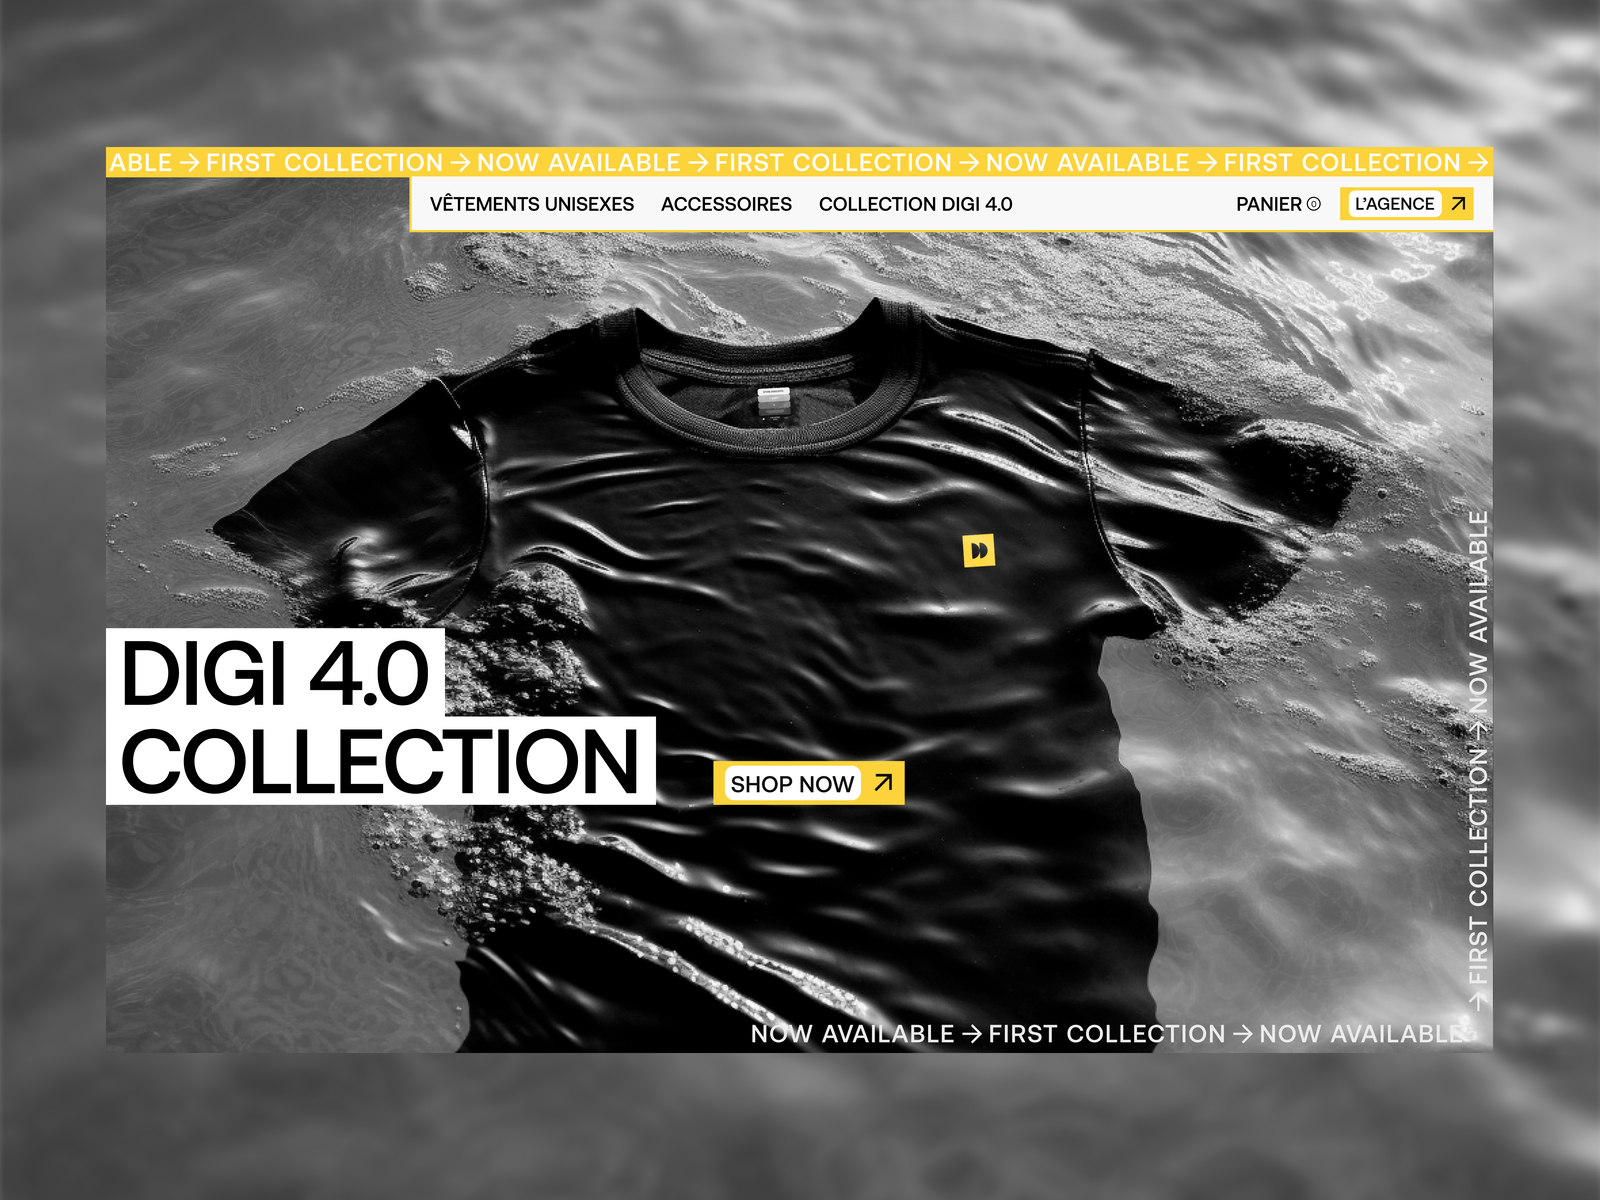 Immerse yourself in the collection right from the header